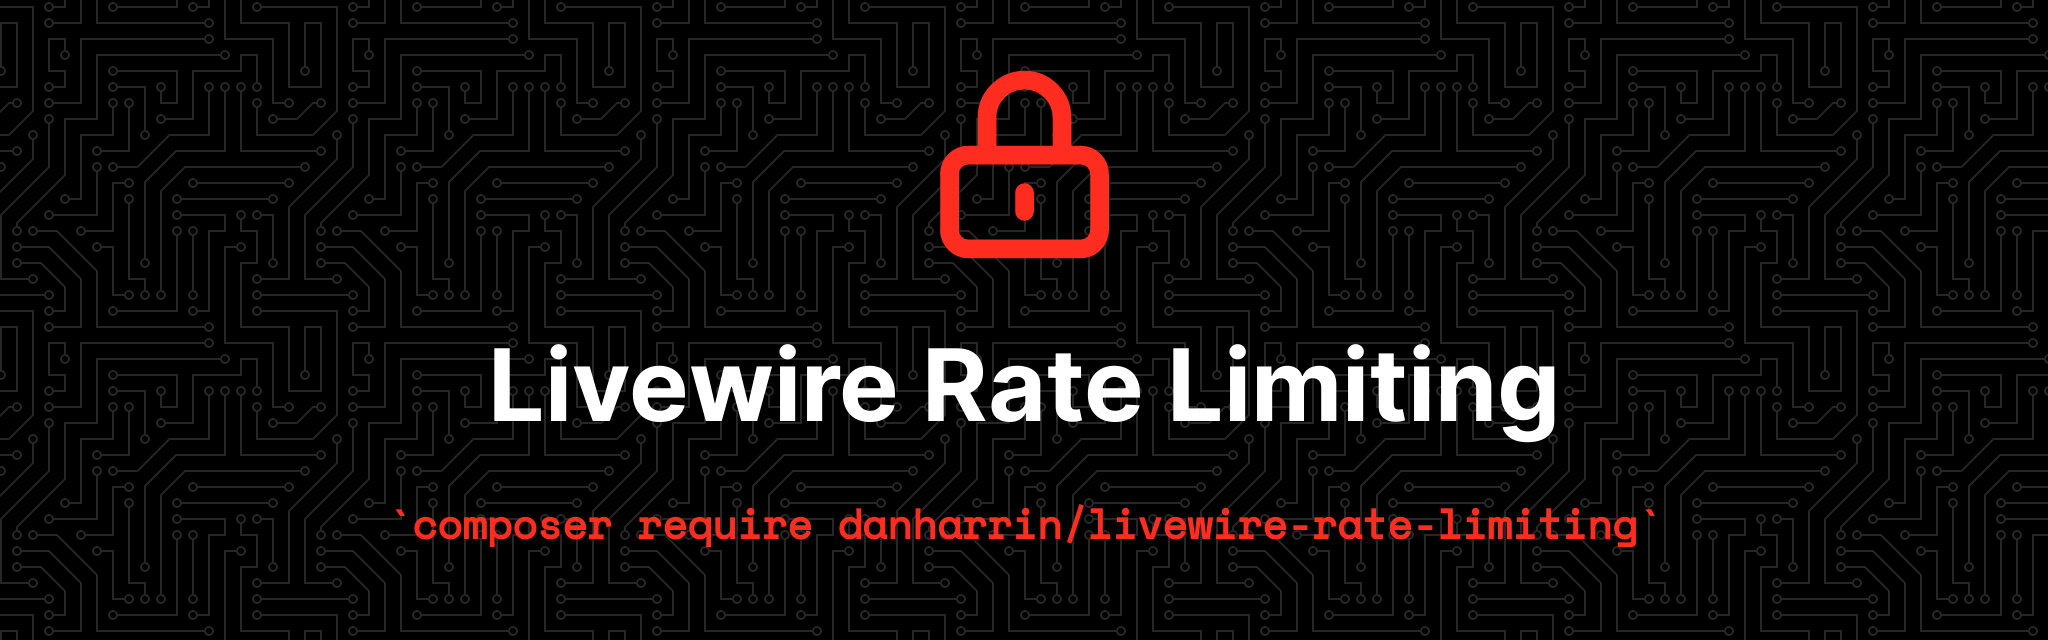 Livewire Rate Limiting - Package Image